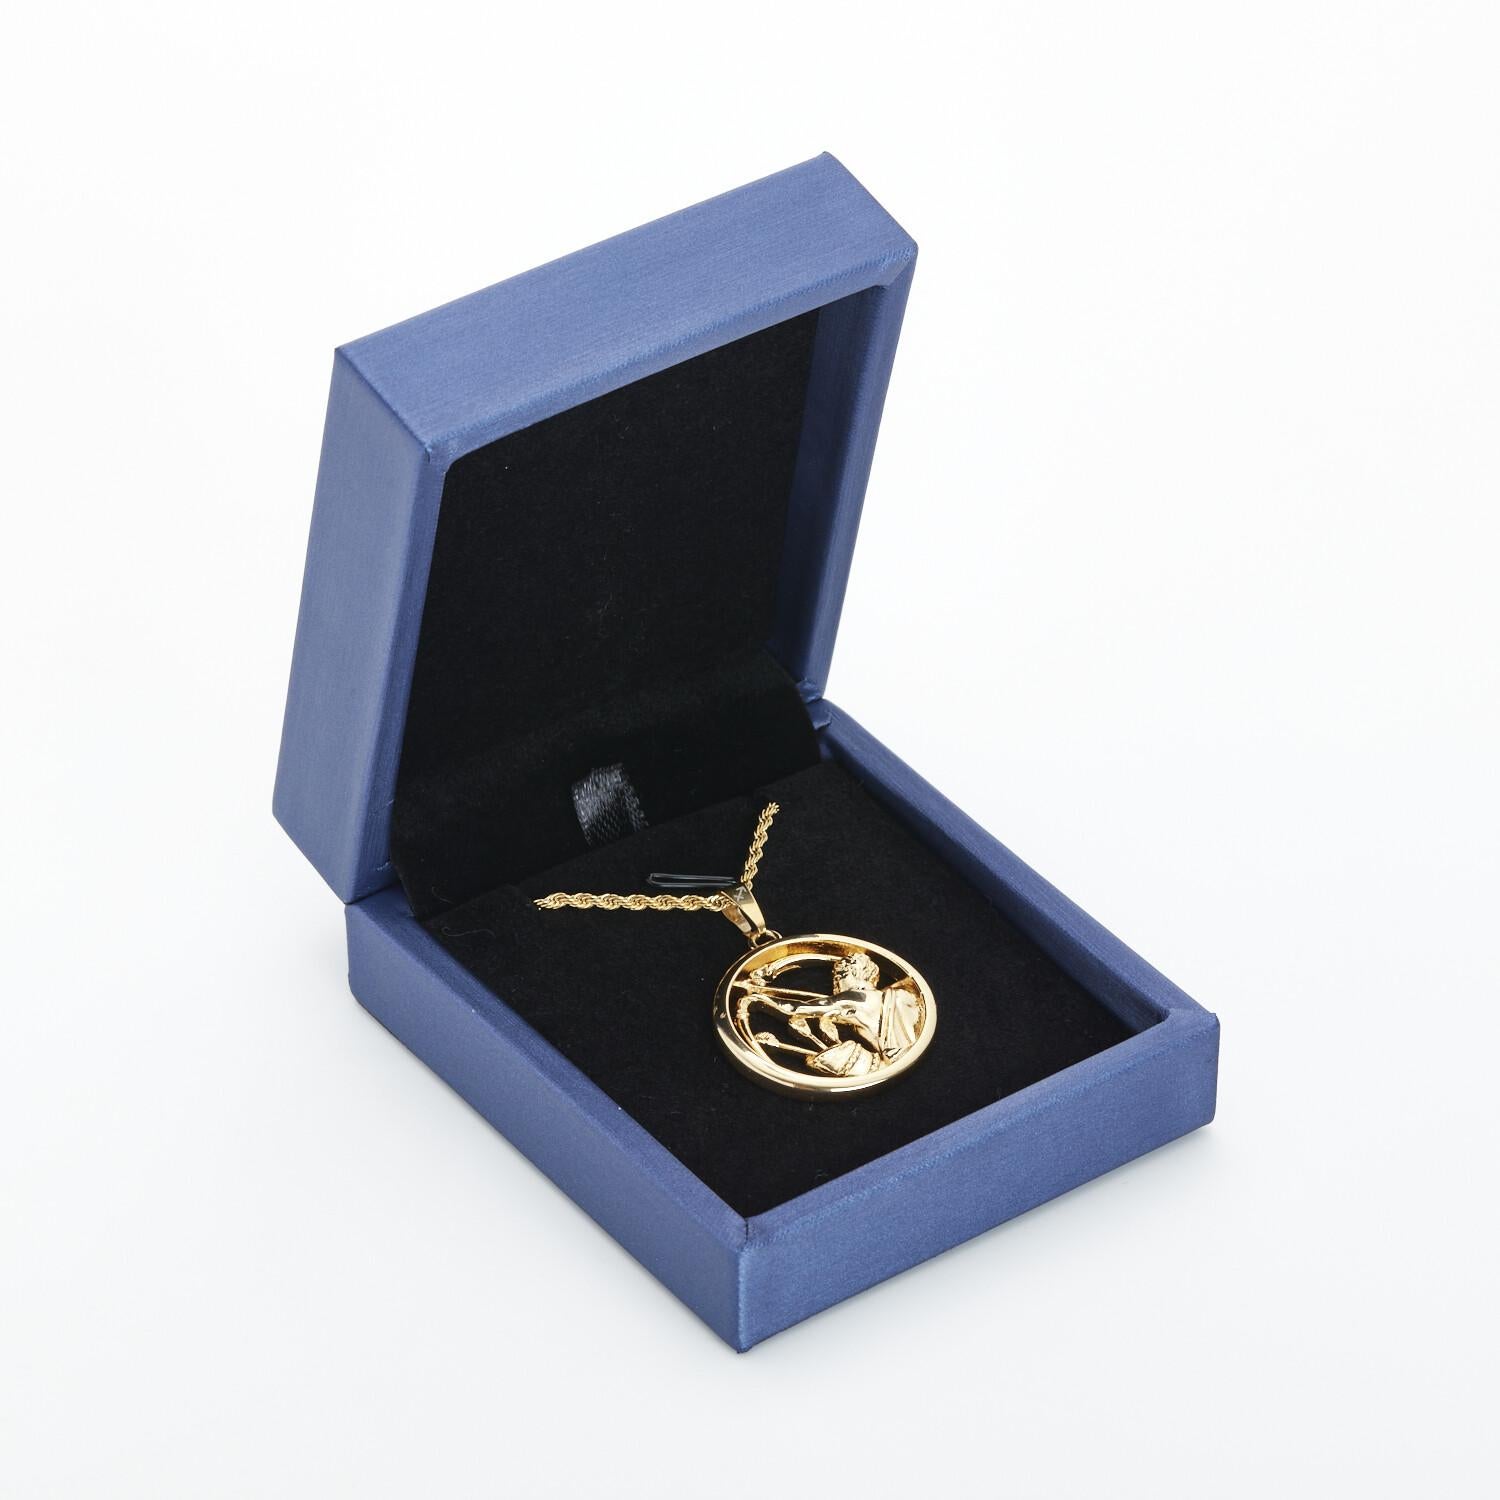 Eternally Sagittarius (November 22 – December 21)

The Eternal Zodiac “Sagittarius” Pendant features a depiction of the sign’s symbol, the Archer. Sagittarius is a fire sign and ruled by the planet Jupiter. Those born under this sign are often free